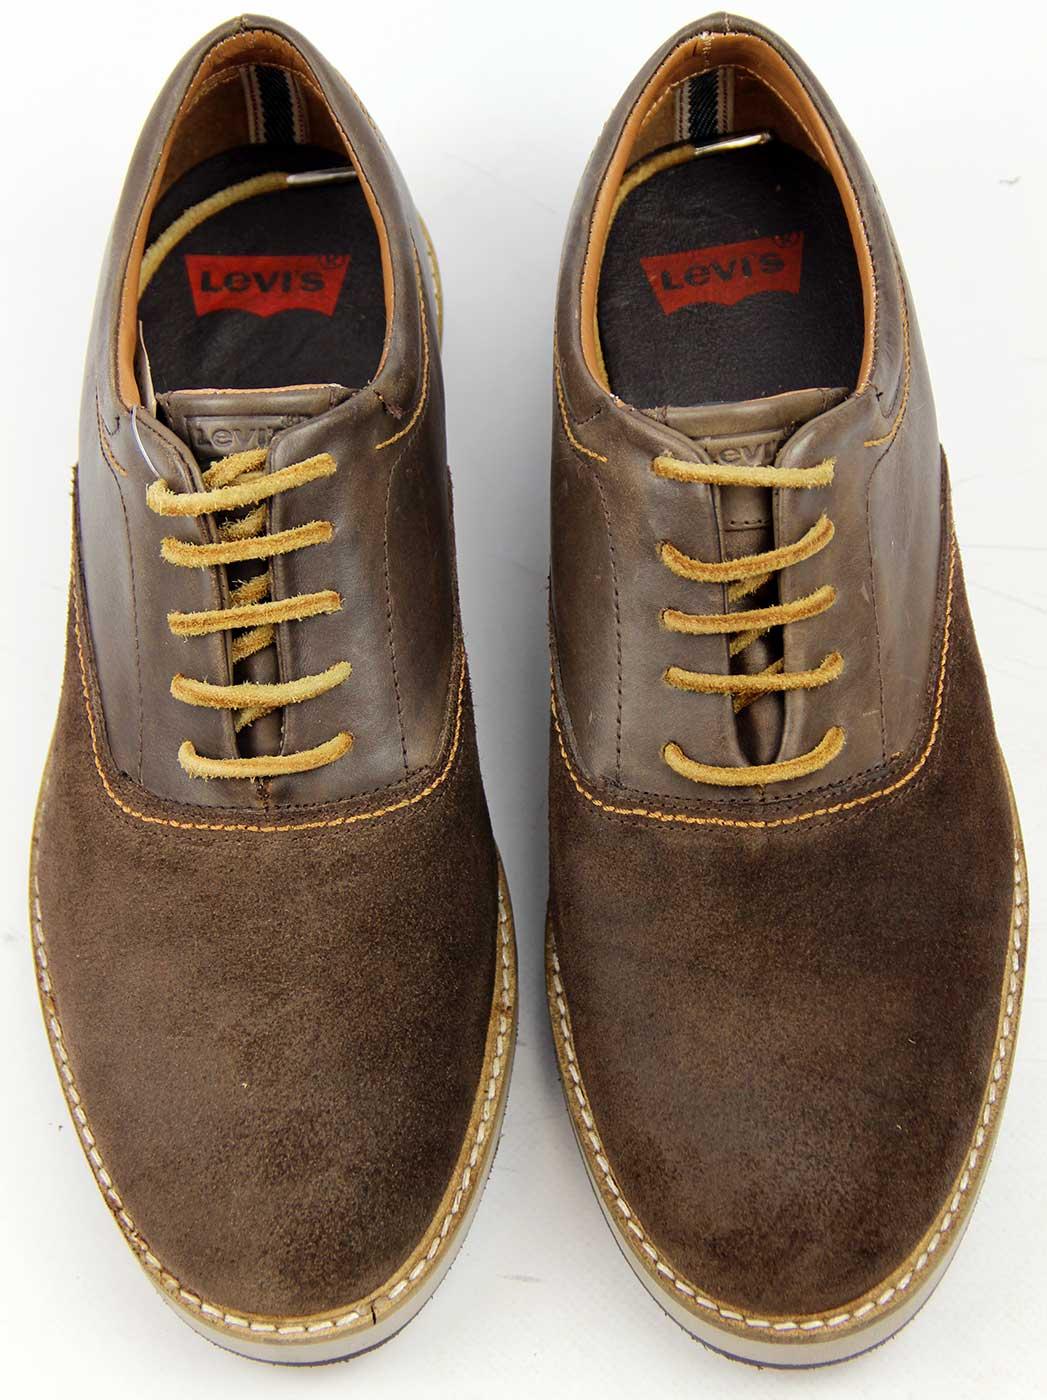 LEVI'S® Retro Indie Mod Suede & Leather Oxford Shoes Dark Brown